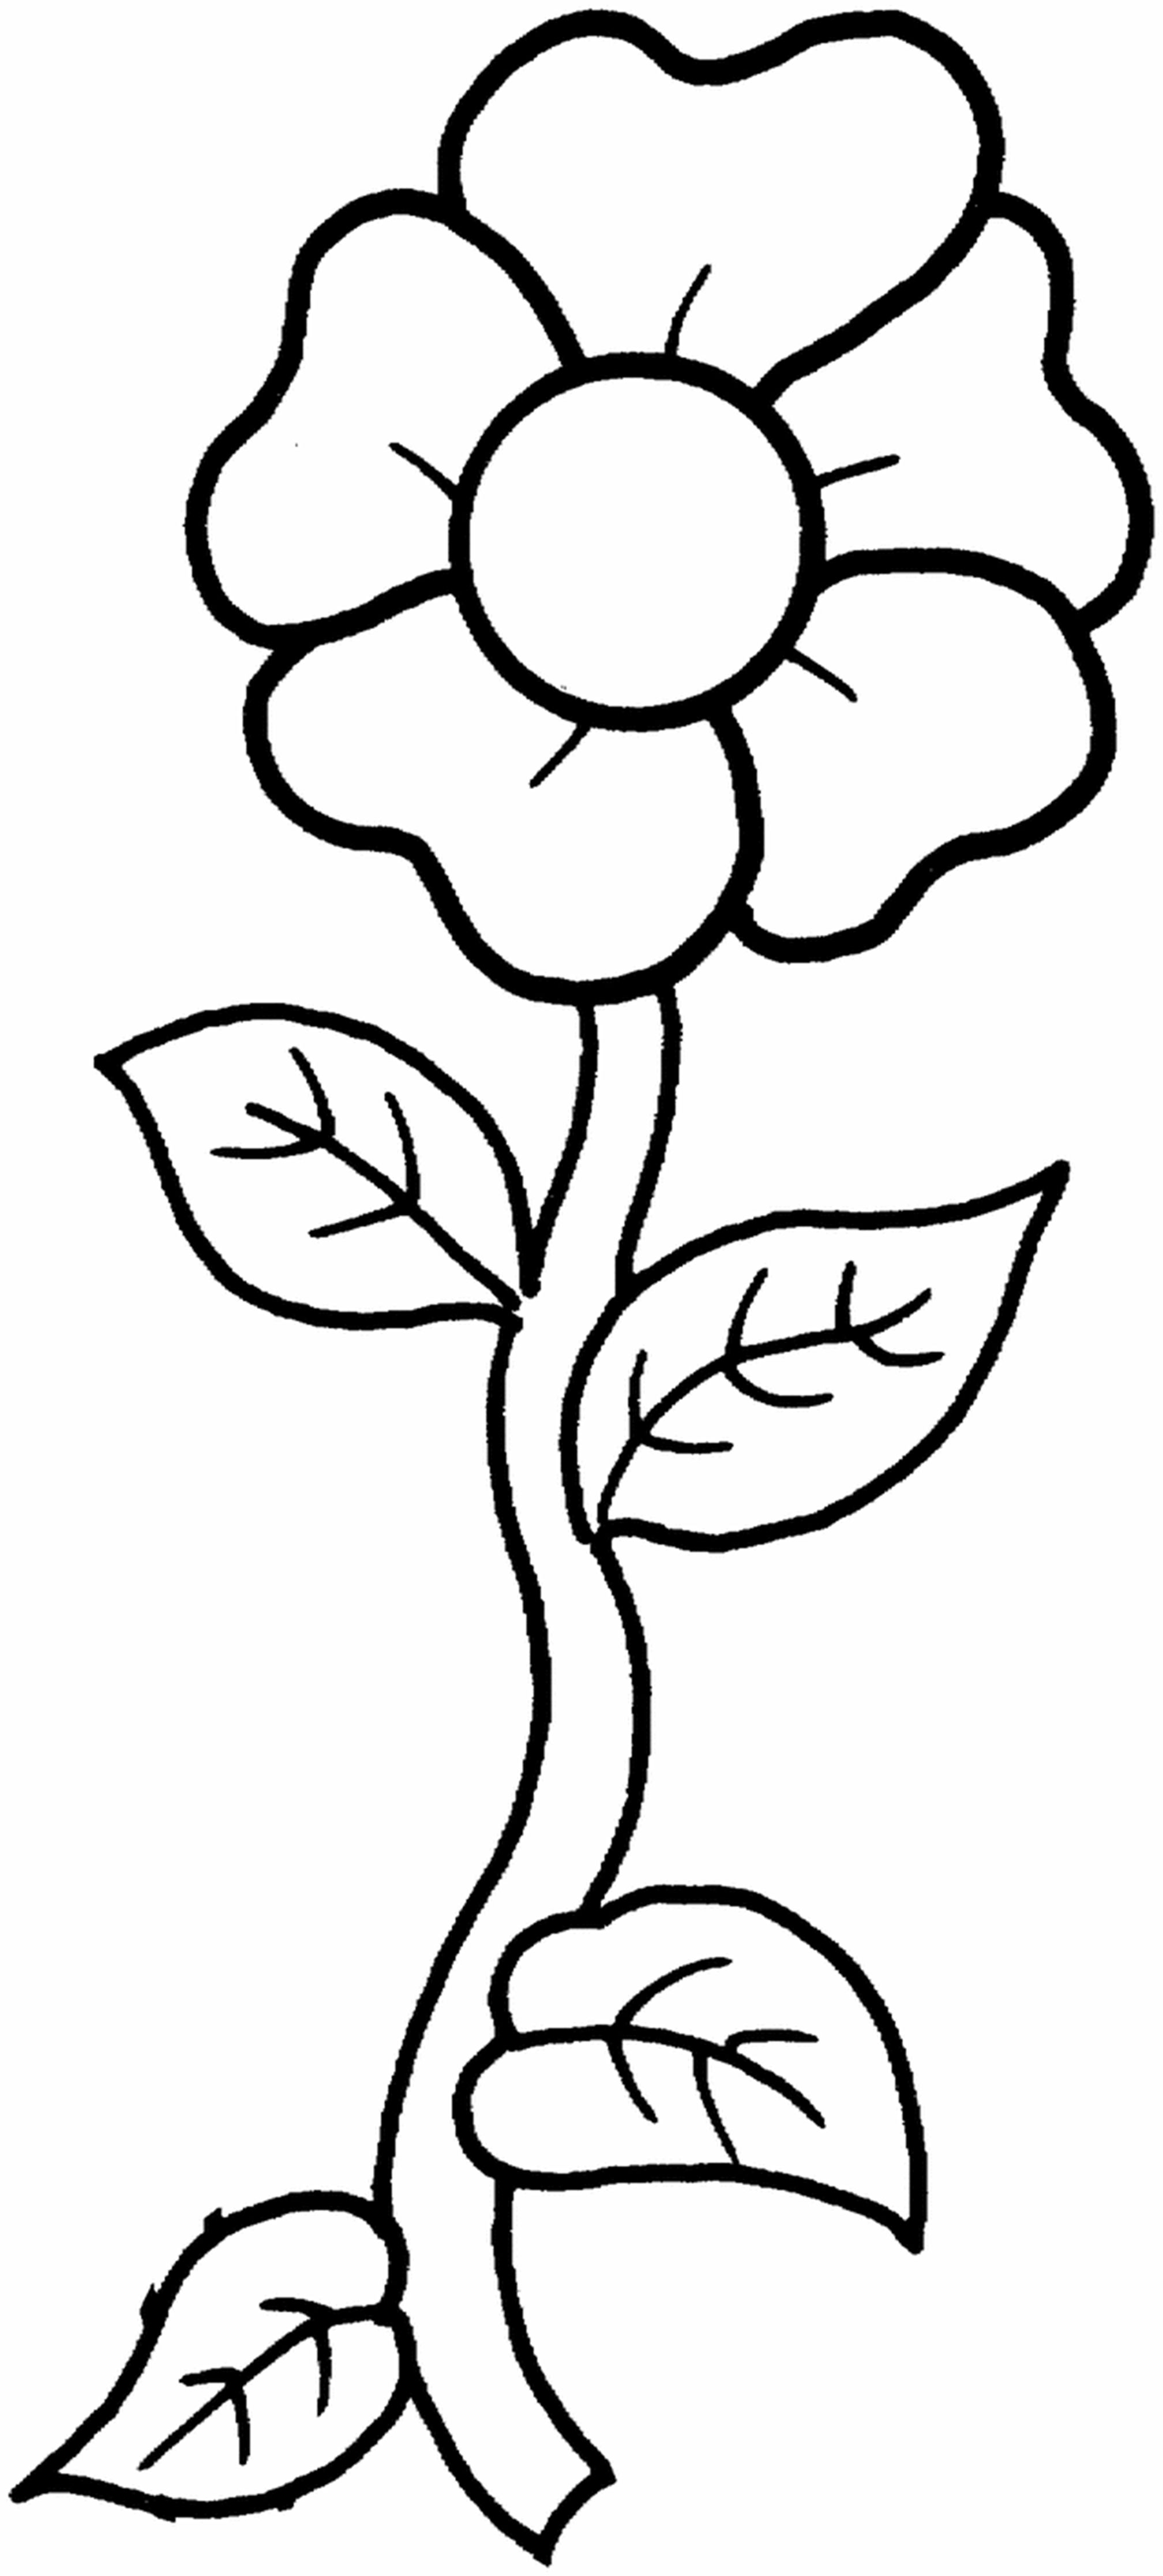 Free Printable Flower Coloring Pages For Kids Best | Coloring_Pages - Free Printable Flower Coloring Pages